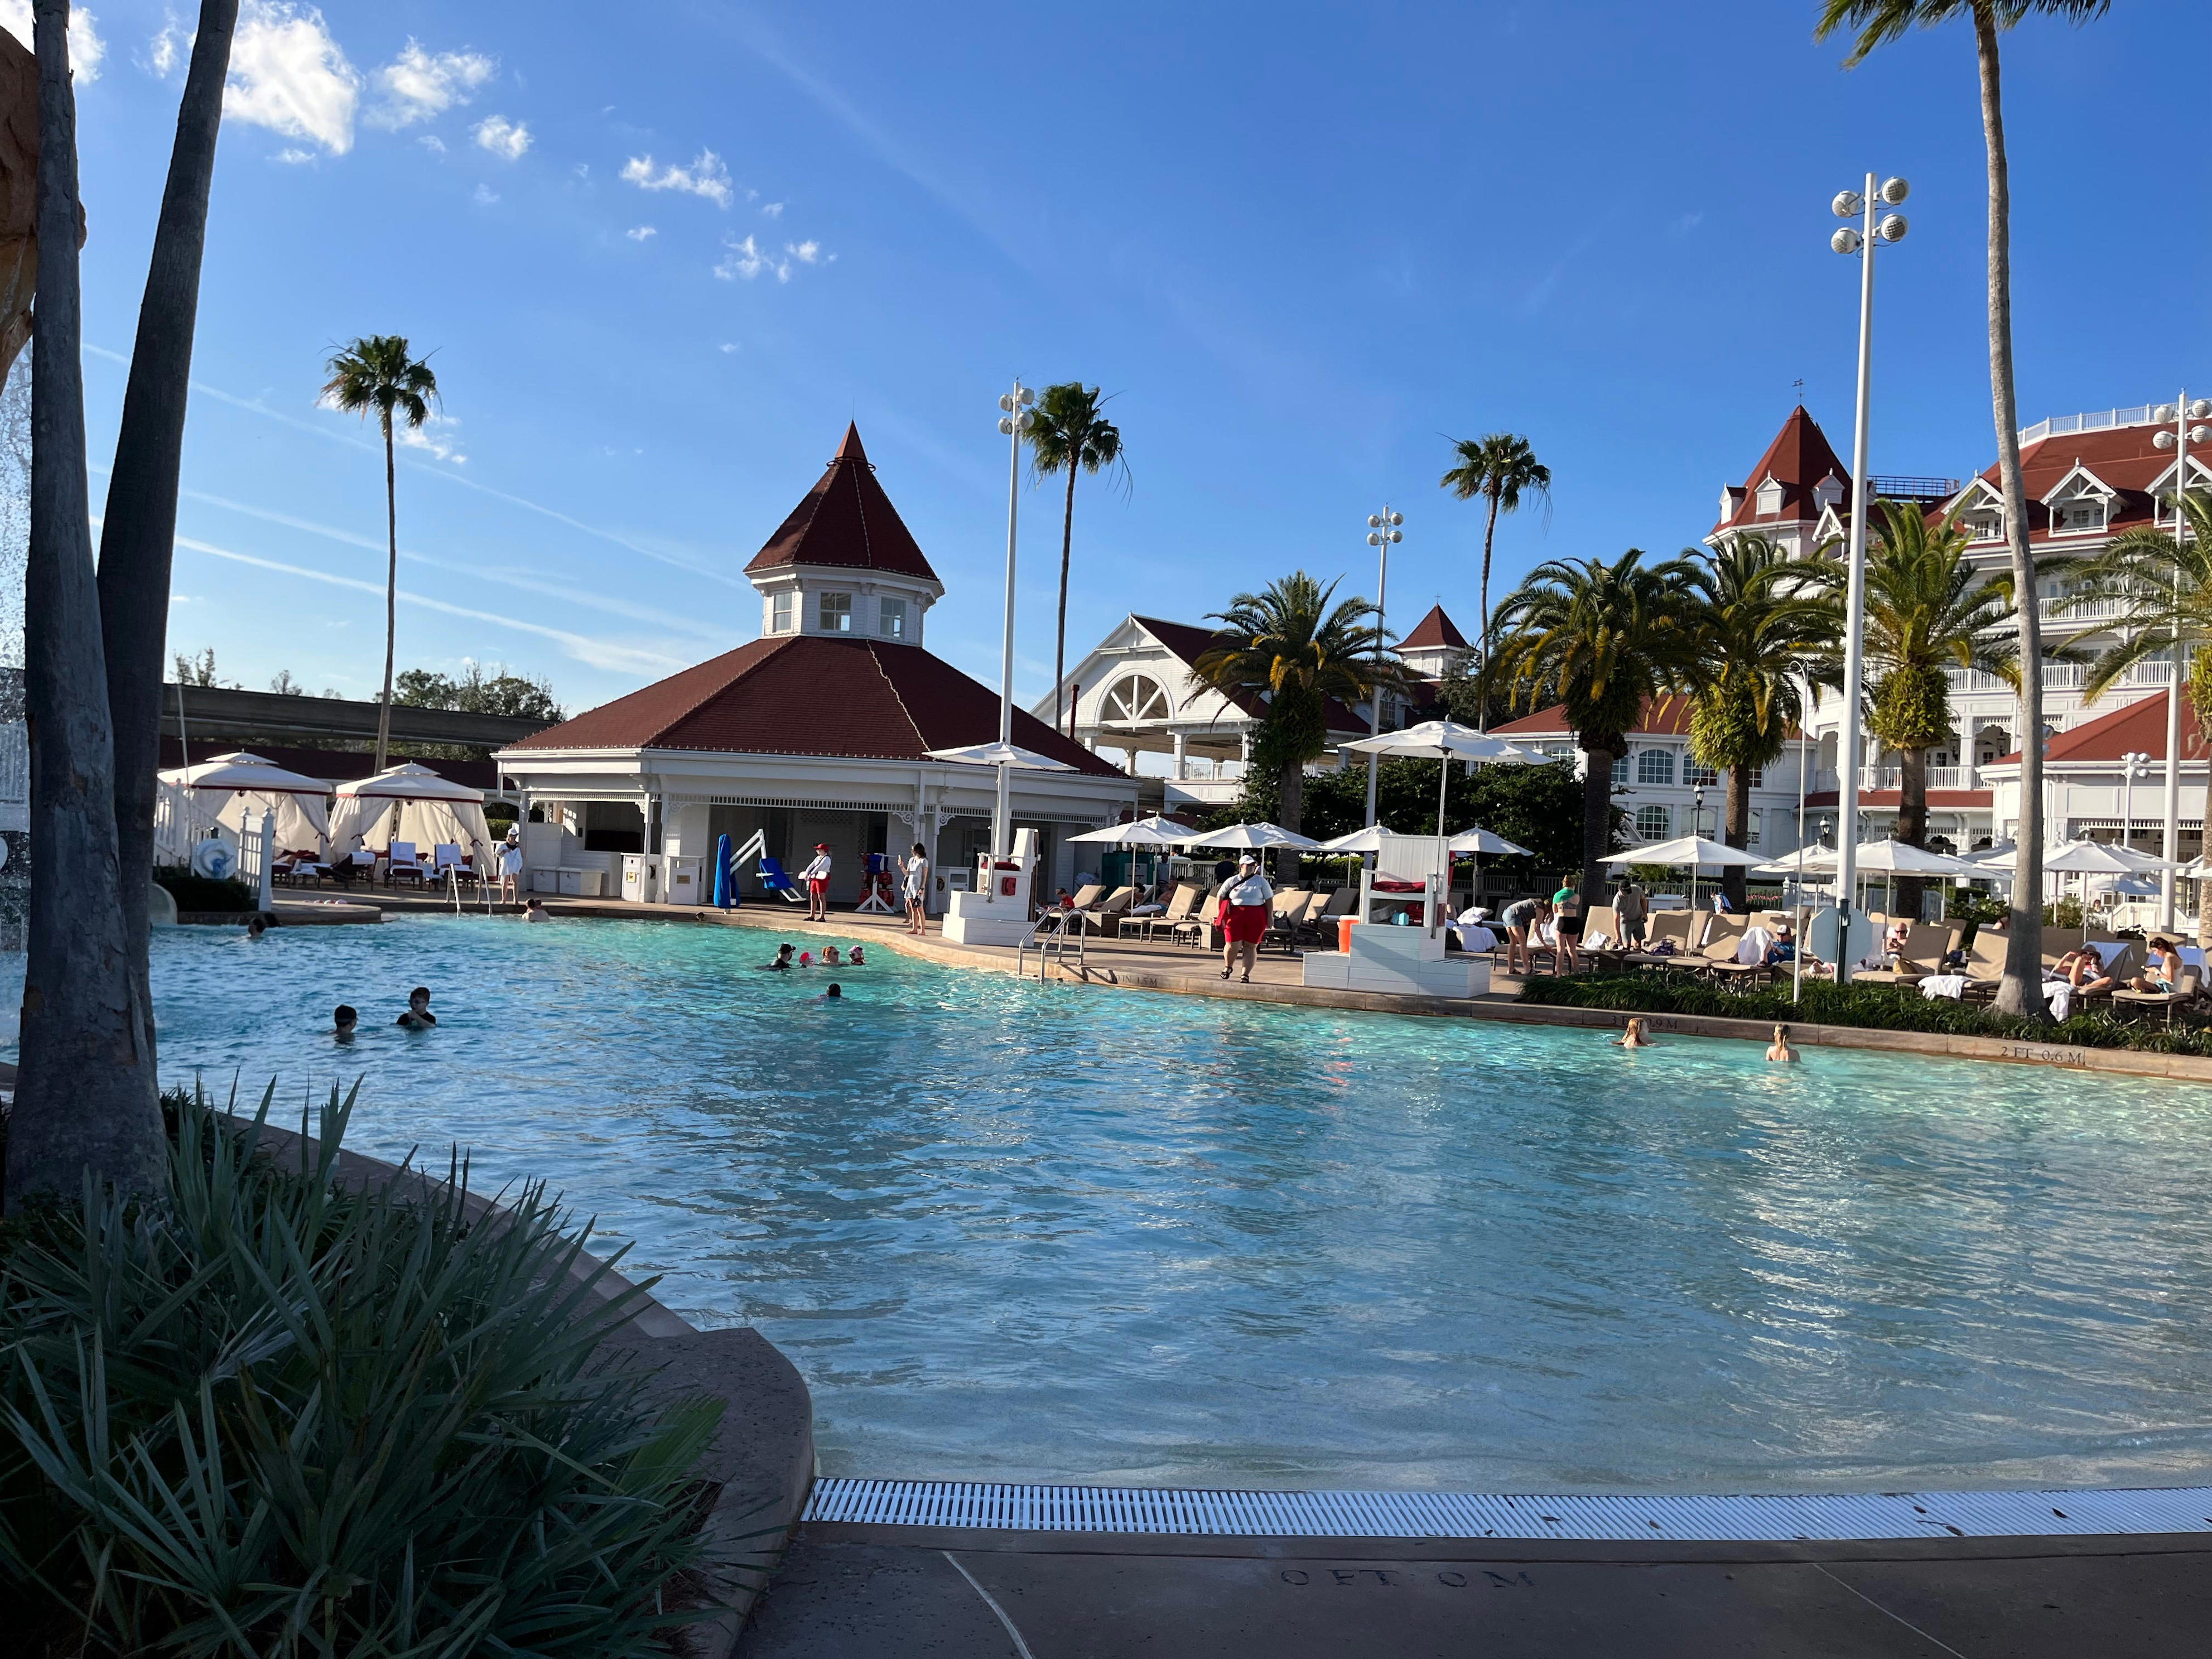 <p>It was very fortunate that the weather was about 80 degrees Fahrenheit and sunny because I wanted to go swimming and enjoy the pool. </p><p>Since this was the family pool, there was music playing, children having fun, and adults taking advantage of the poolside bar. </p><p>There were some <a href="https://www.businessinsider.com/trying-cabana-at-typhoon-lagoon-disney-world-worth-it-2022">private cabanas</a> that could be rented. I didn't opt to do that, but it's good to know that's an option if you're looking for something more private. </p><p>Overall, it was a fun place to be. I especially liked the throwback Disney Channel tunes that were playing. </p>